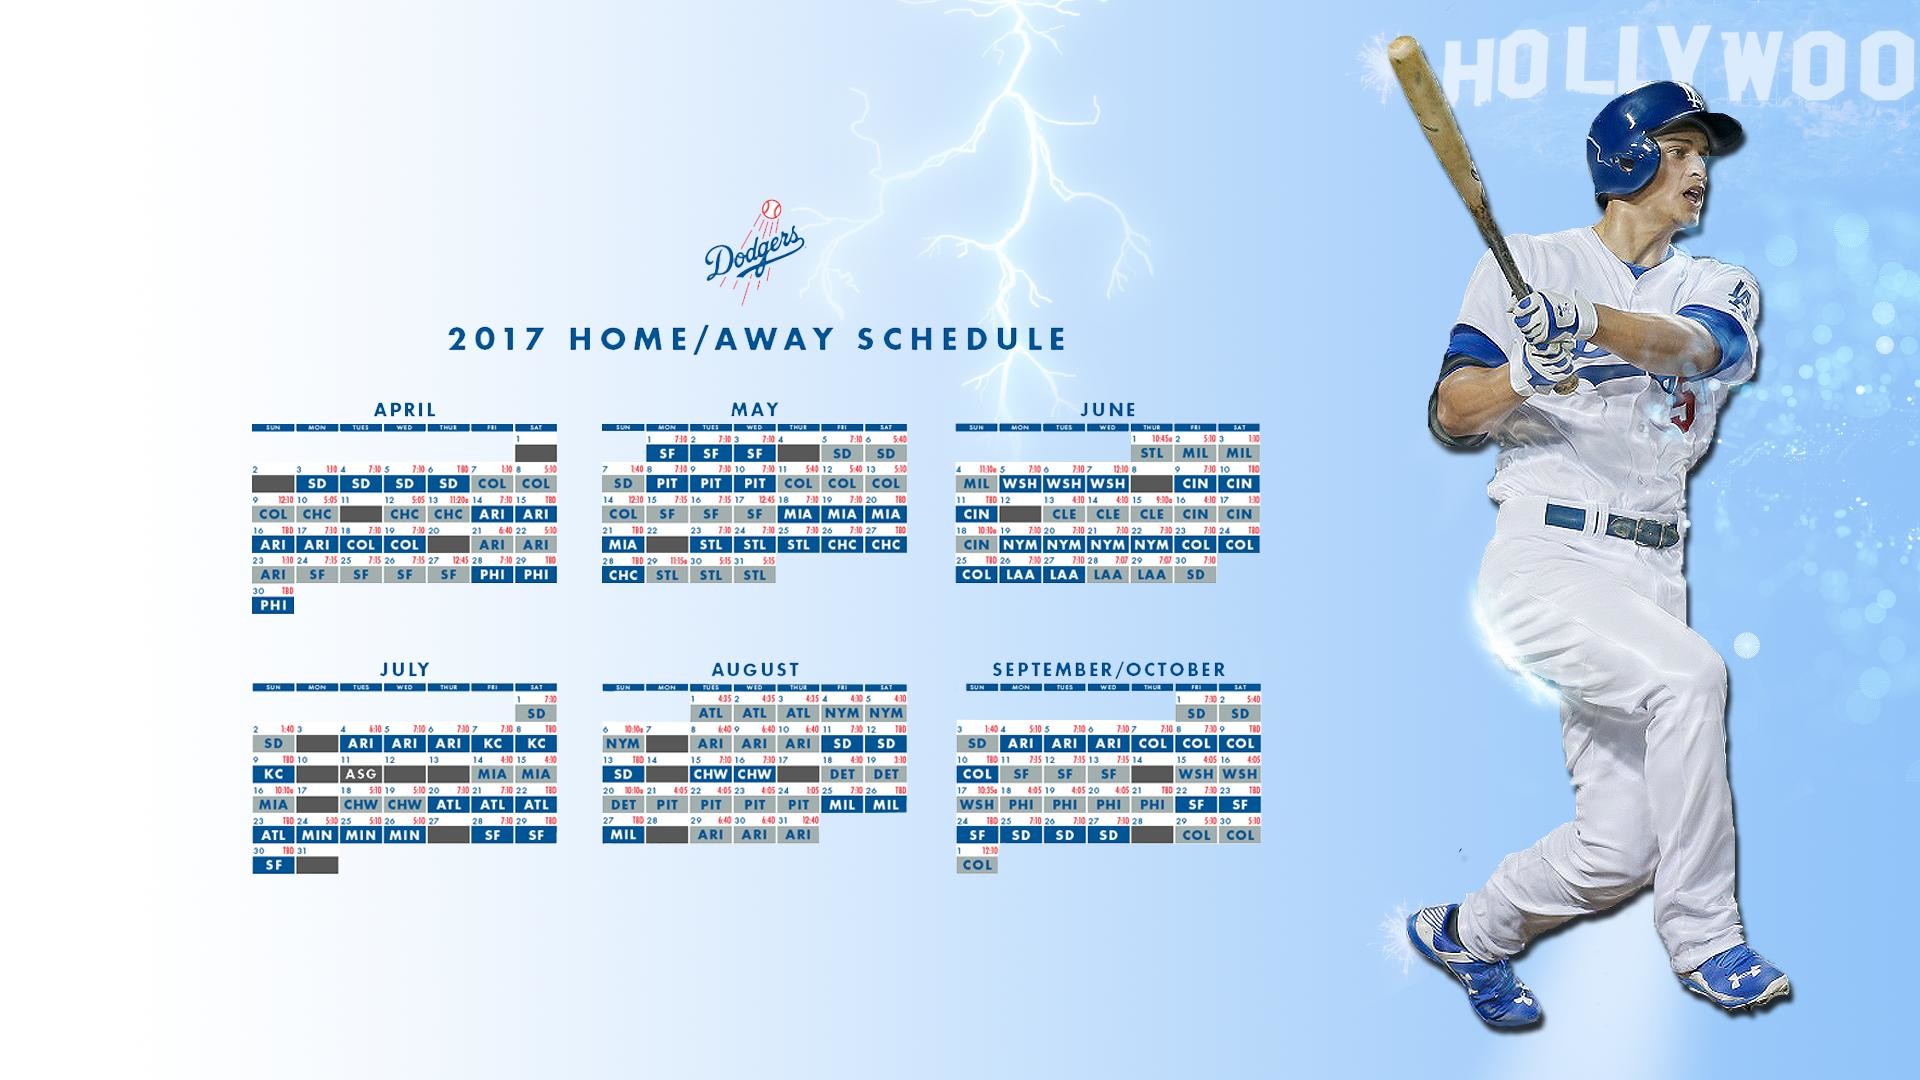 1920x1080 Made a 2017 schedule wallpaper featuring Corey Seager!